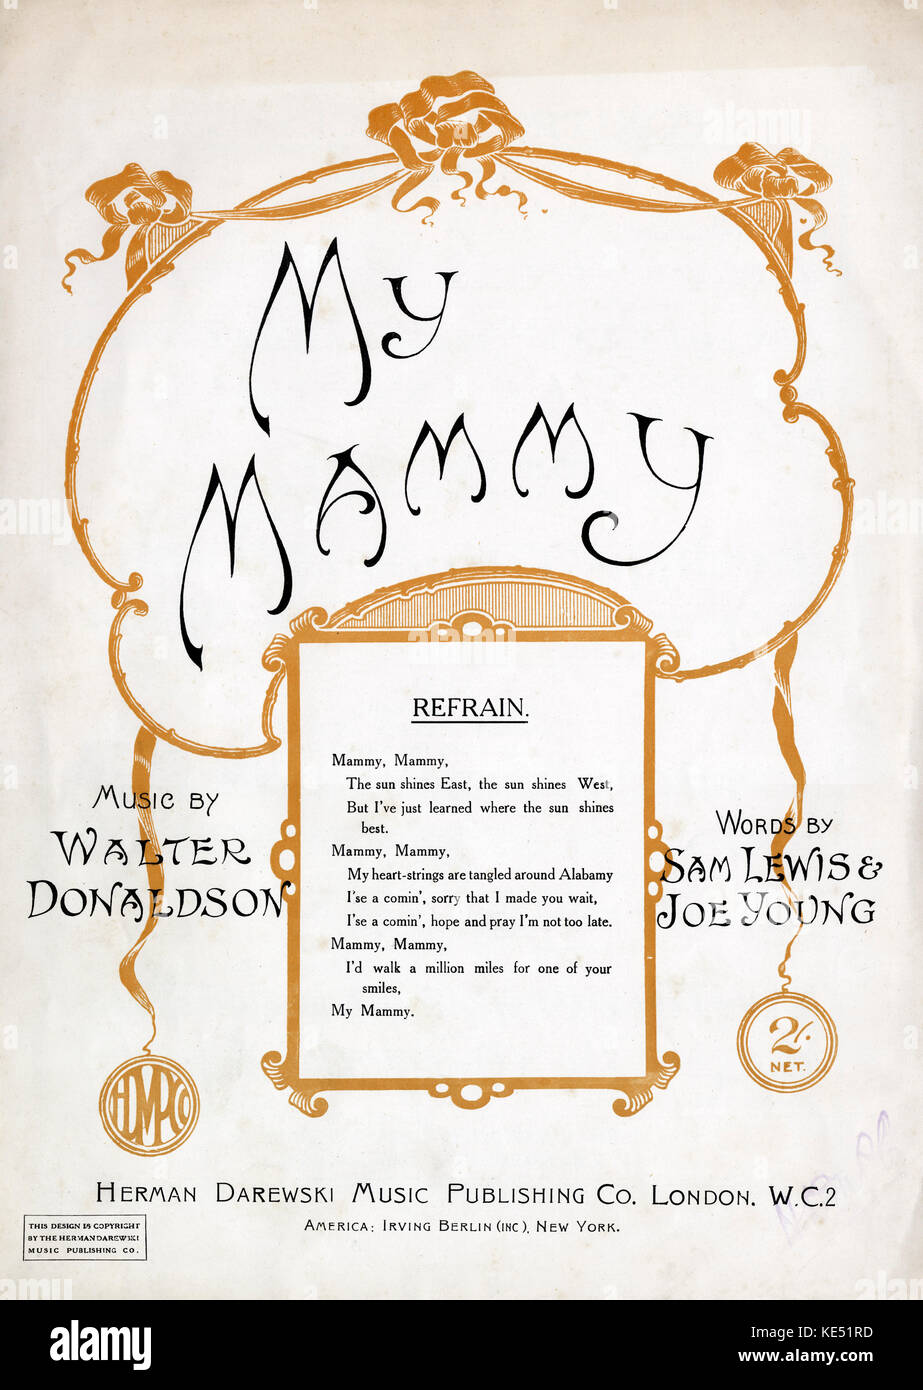 'My Mammy' - song composed by Walter Donaldson. Score cover. Published: London, Herman Darewski - New York, Irving Berlin, 1921. Song made famous by Al Jolson, American actor and singer. Words by Sam Lewis & Joe Young. Stock Photo